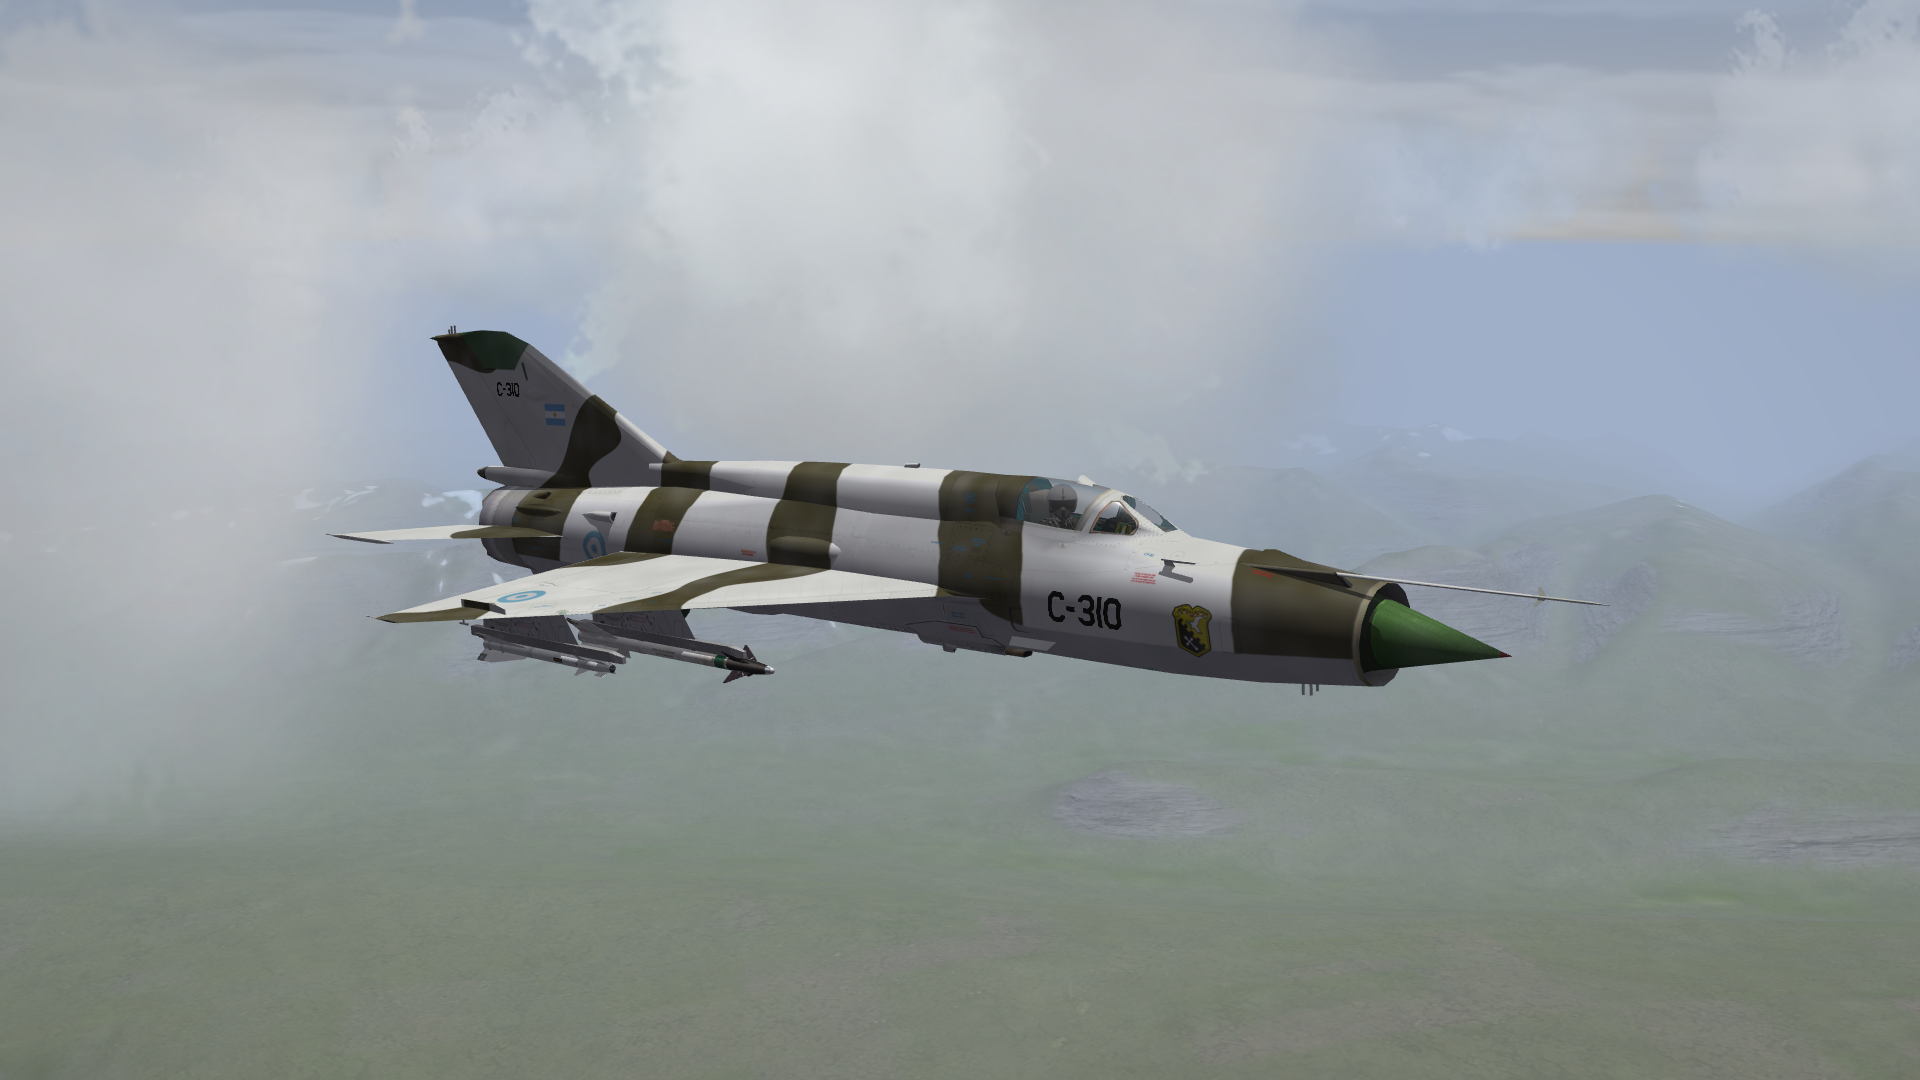 [Fictional] Mikoyan-Gurevich MiG-21MR Fishbed